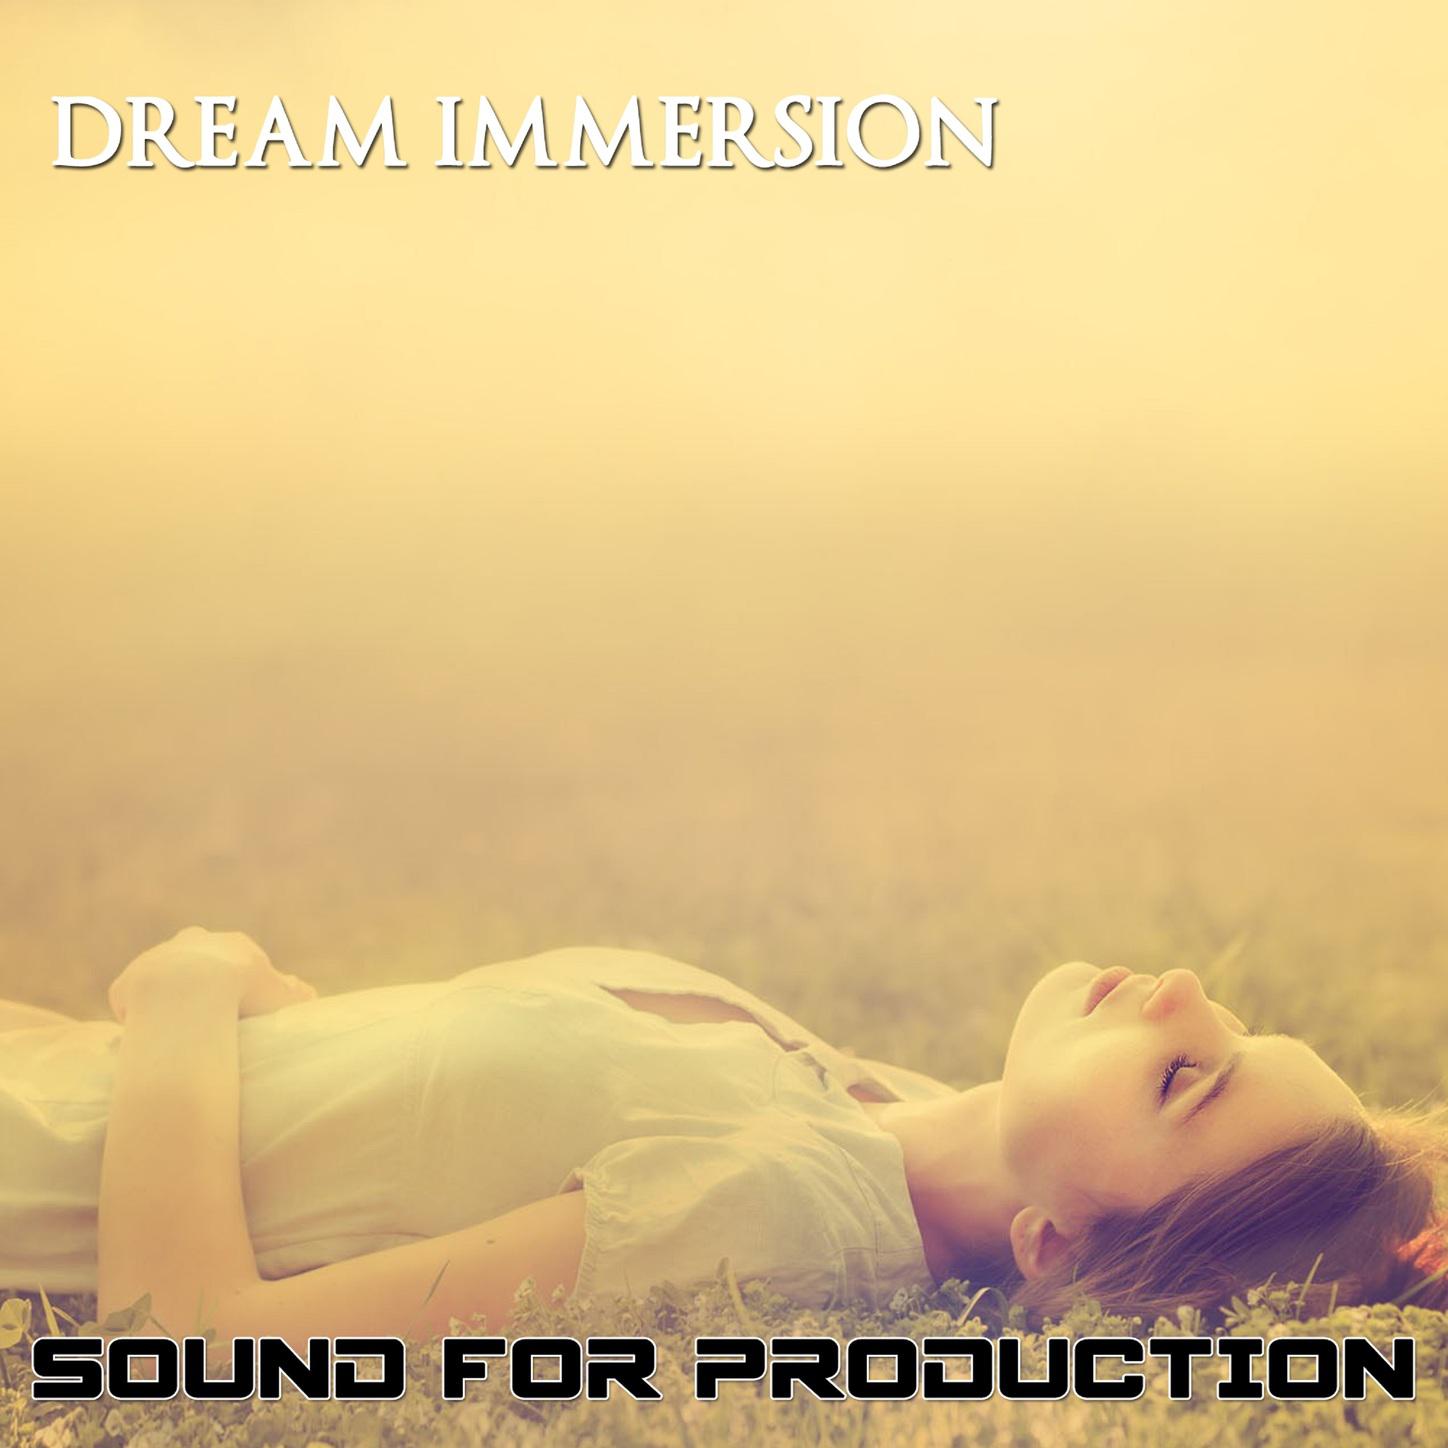 Sound For Production Dream Immersion